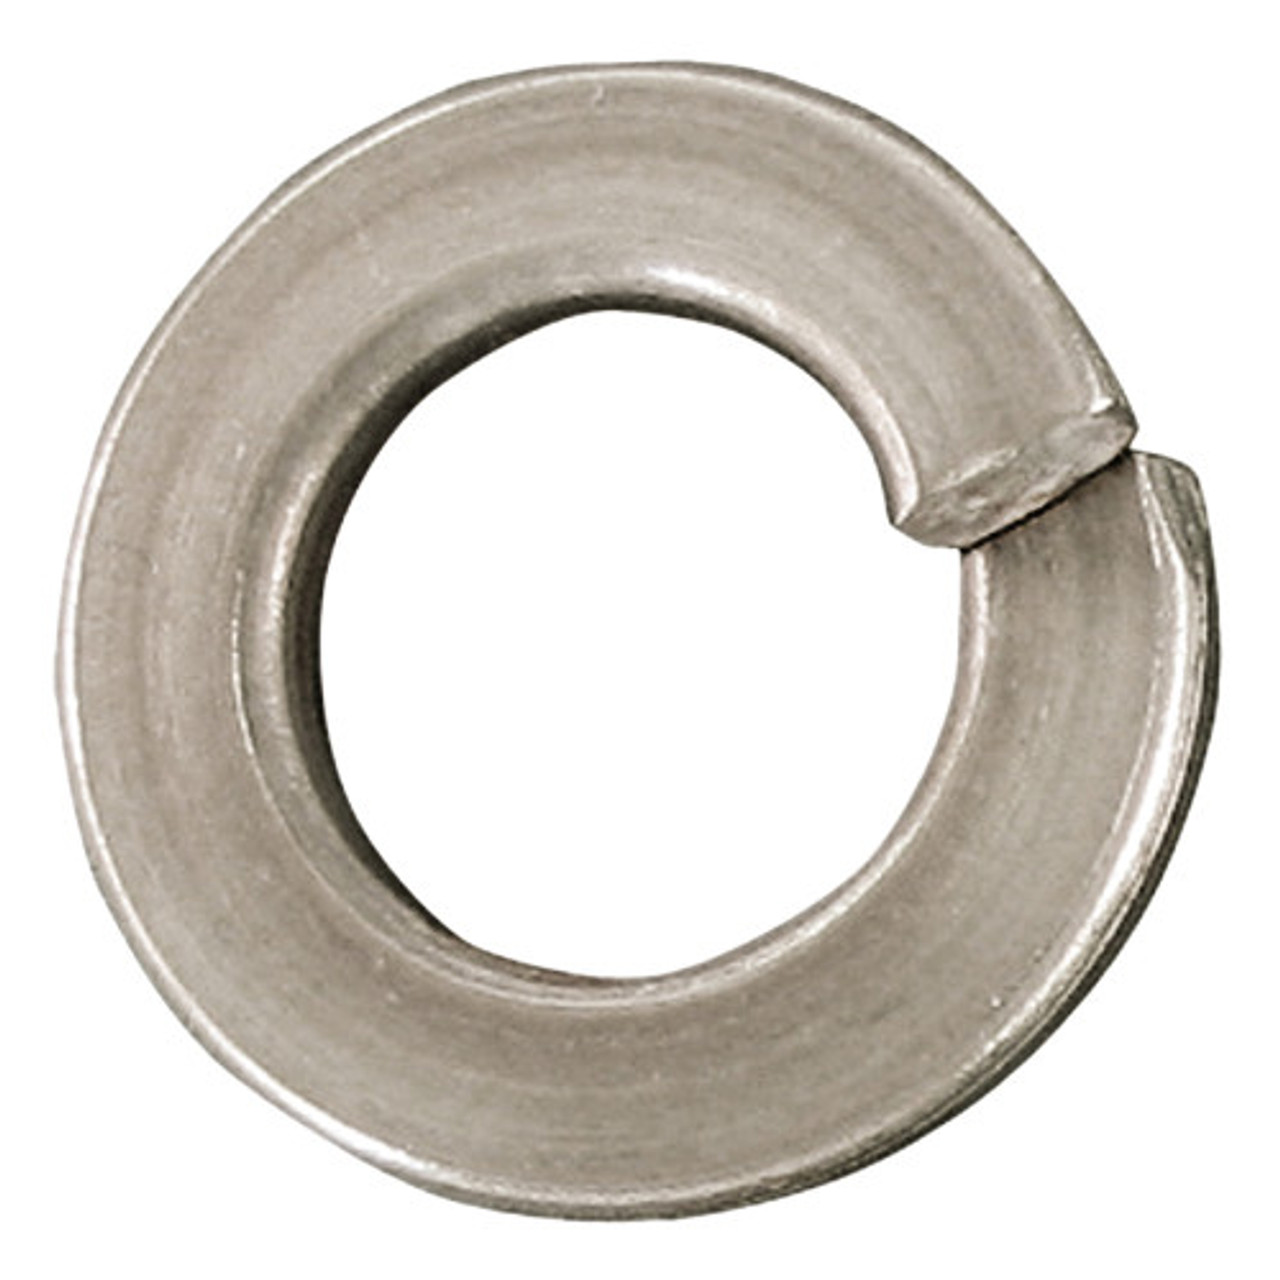 24mm Zinc Plated Lock Washer 25 Pc.   740-024